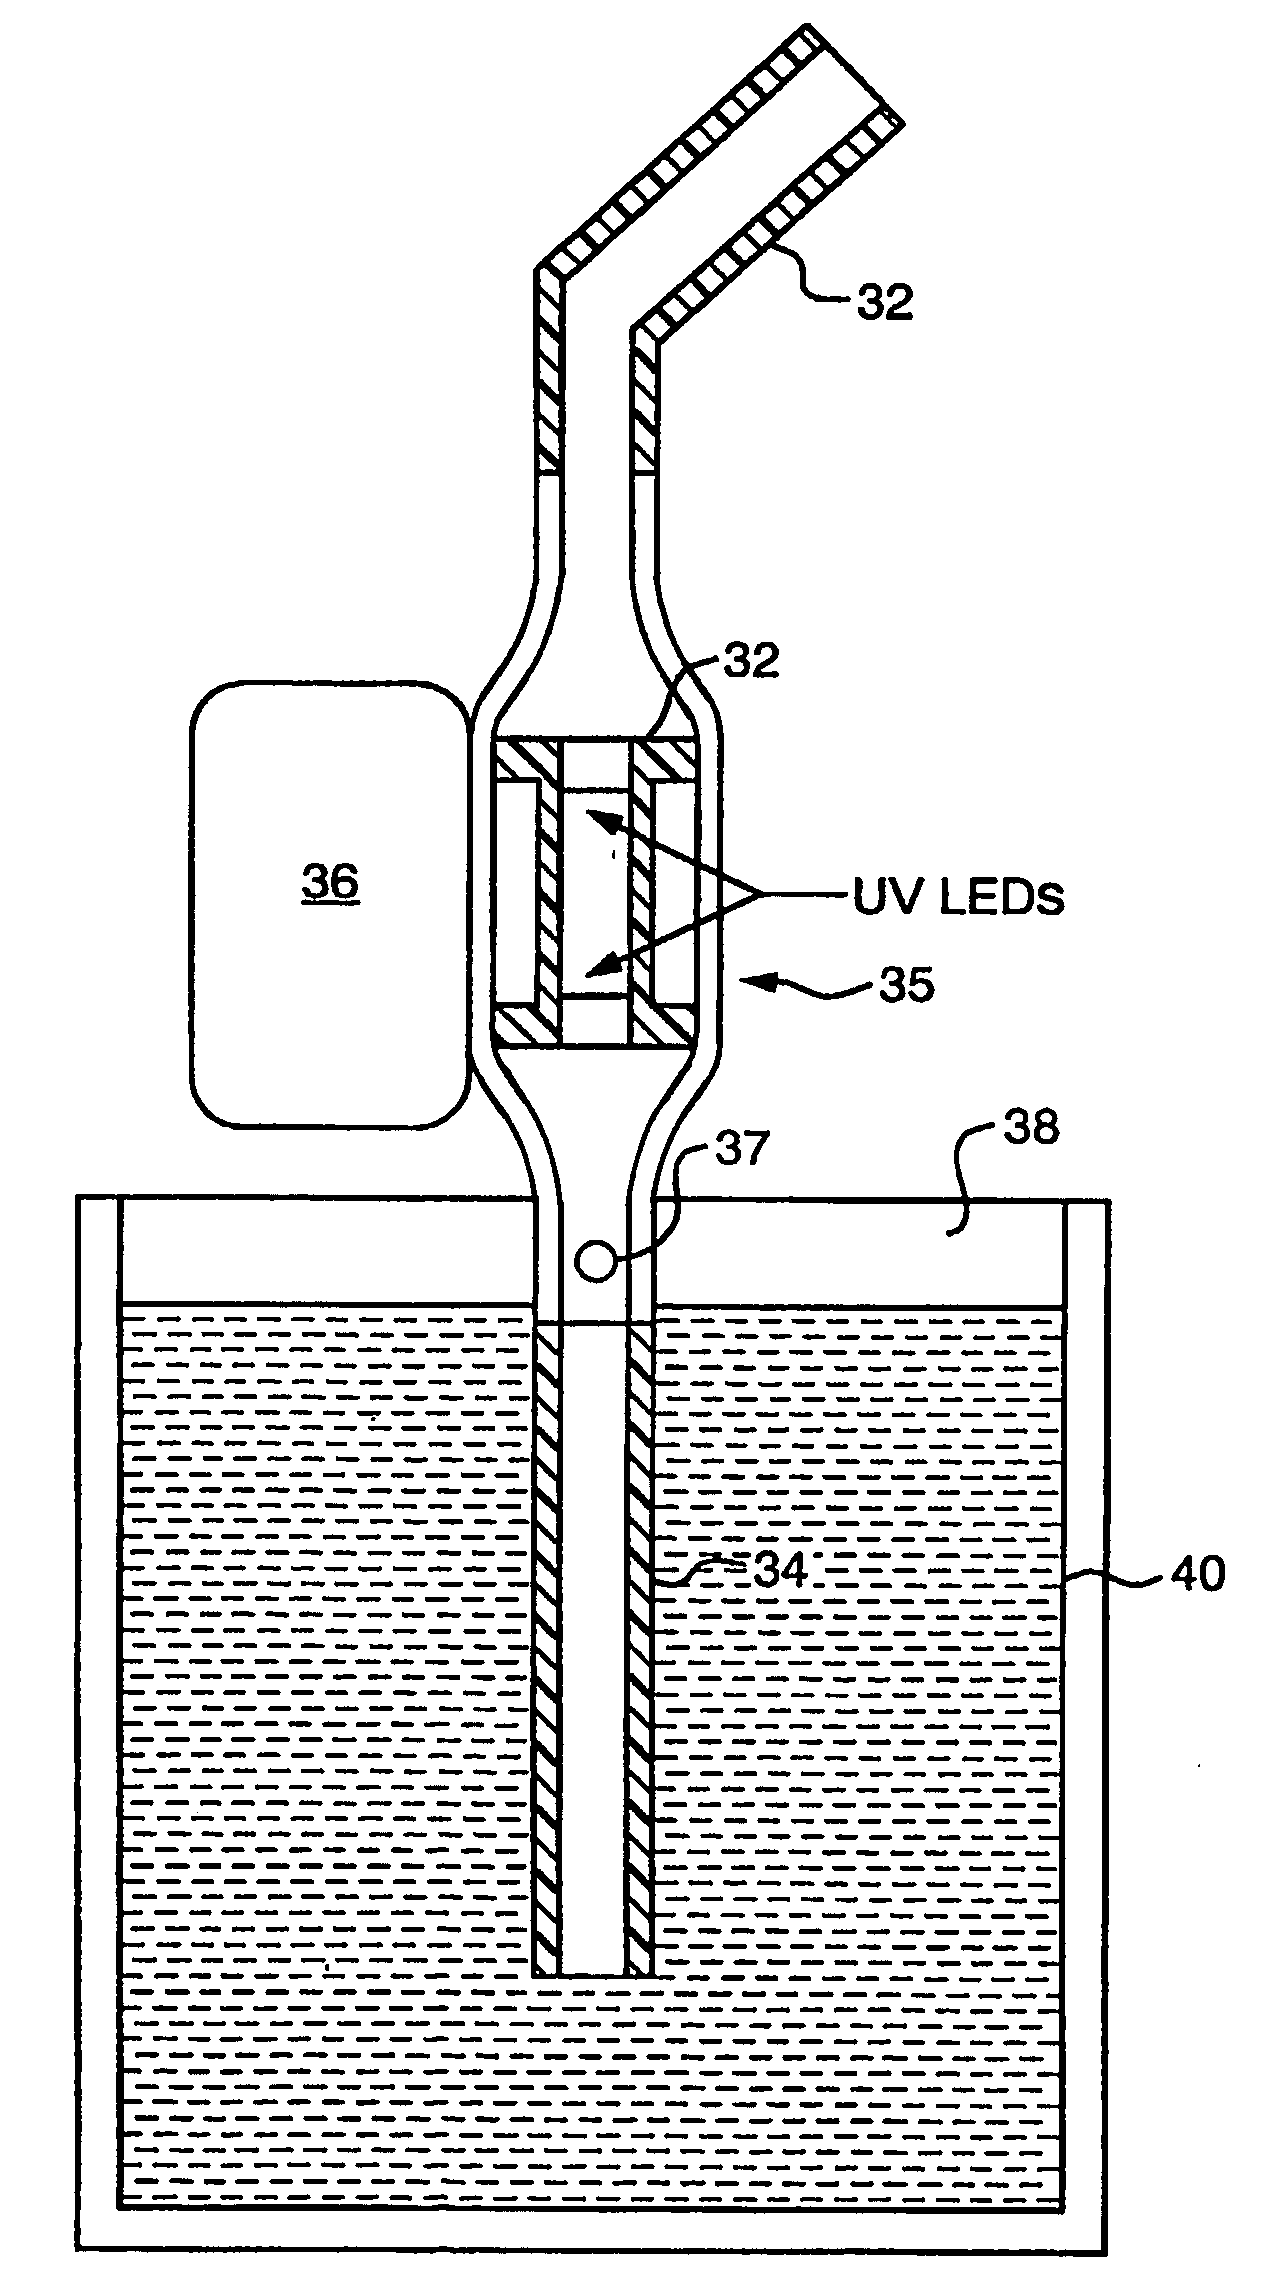 Uv led based water purification module for intermittantly operable flow-through hydration systems